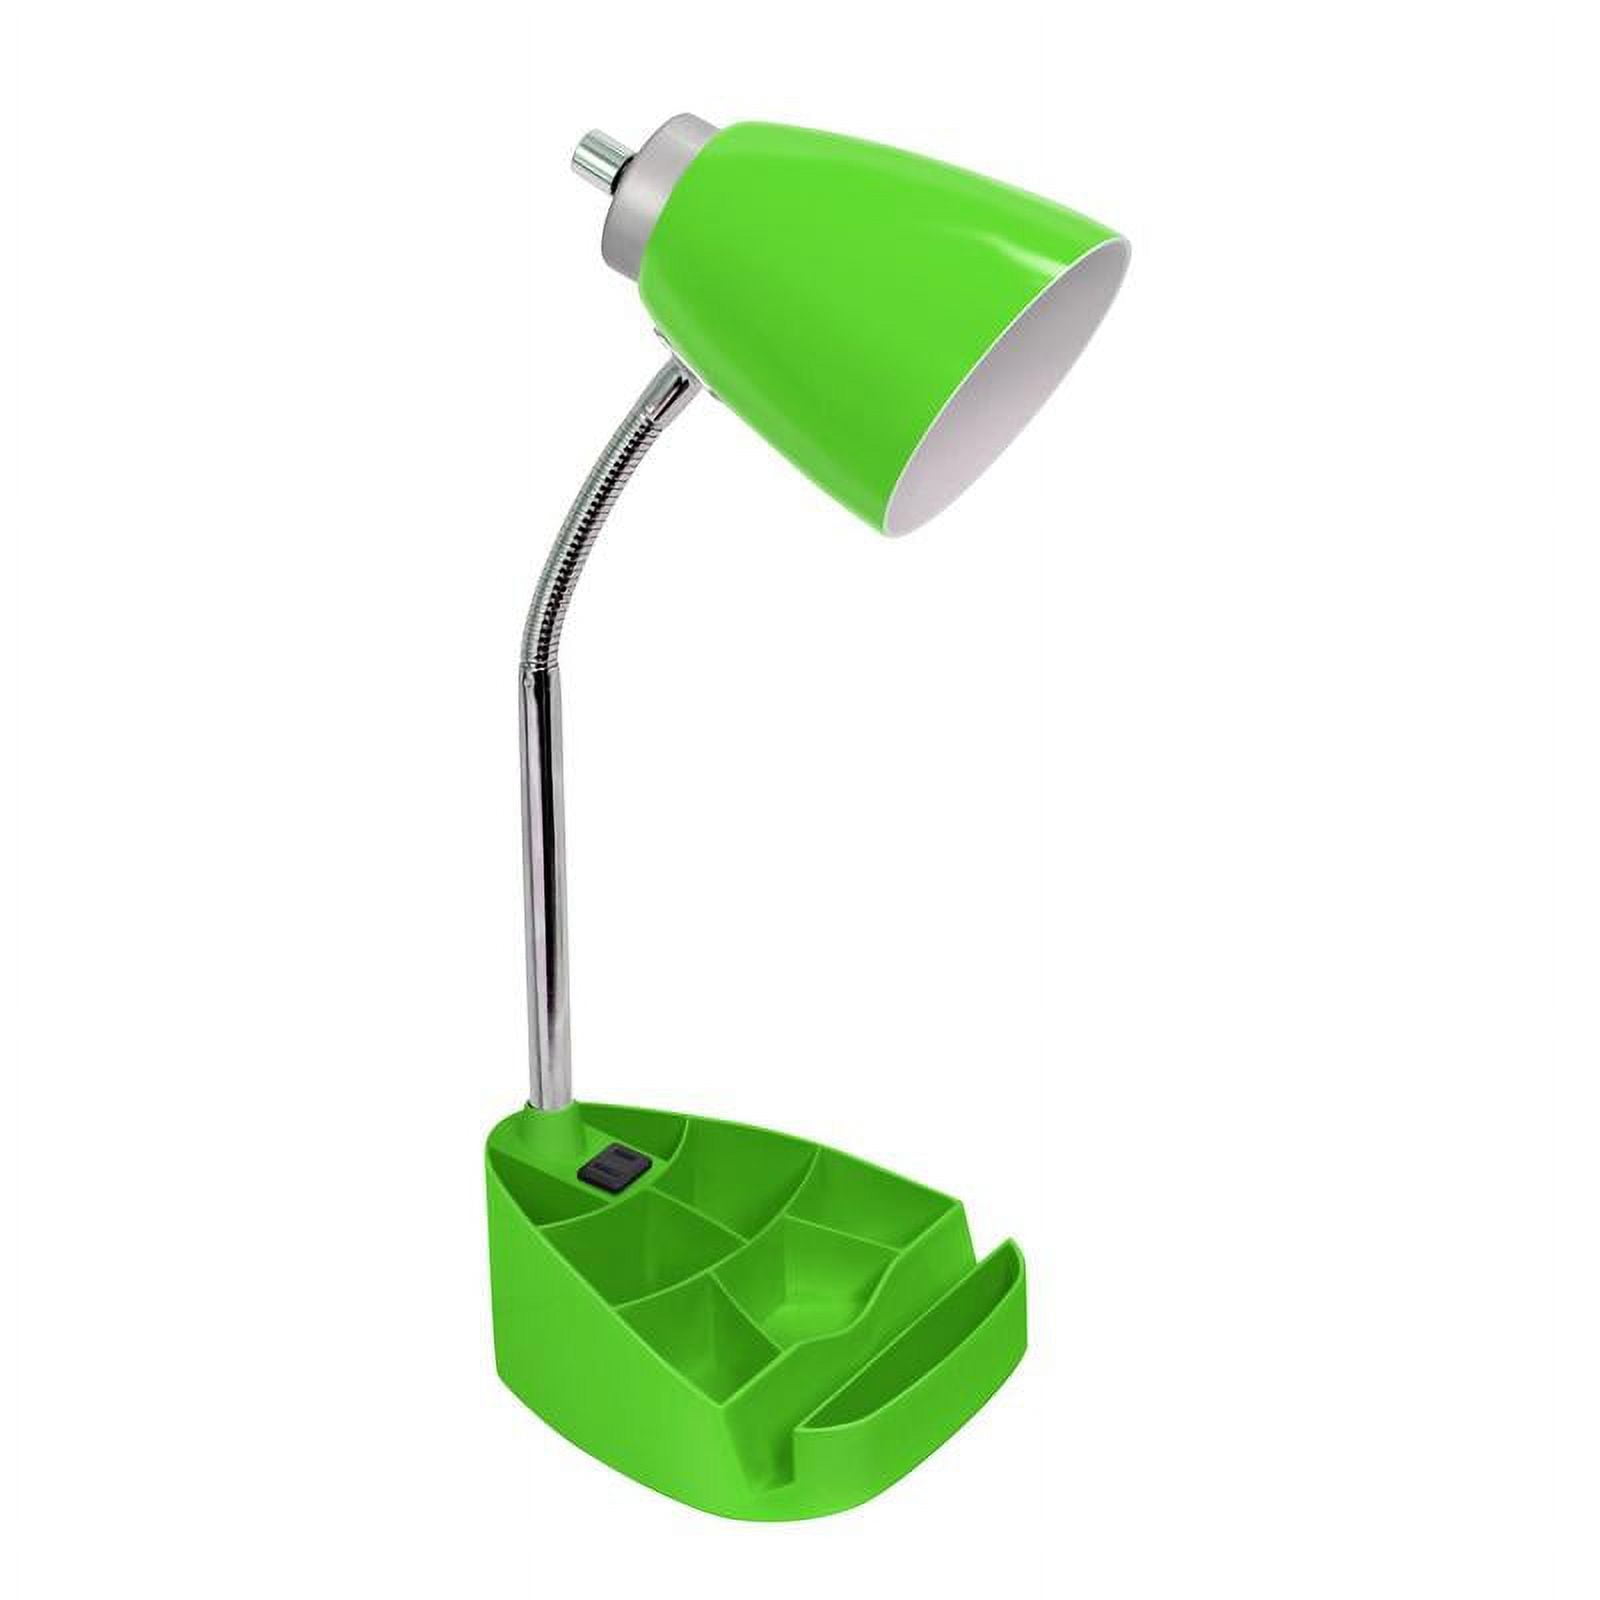 Ld1057-grn Gooseneck Organizer Desk Lamp With Ipad Tablet Stand Book Holder & Charging Outlet, Green